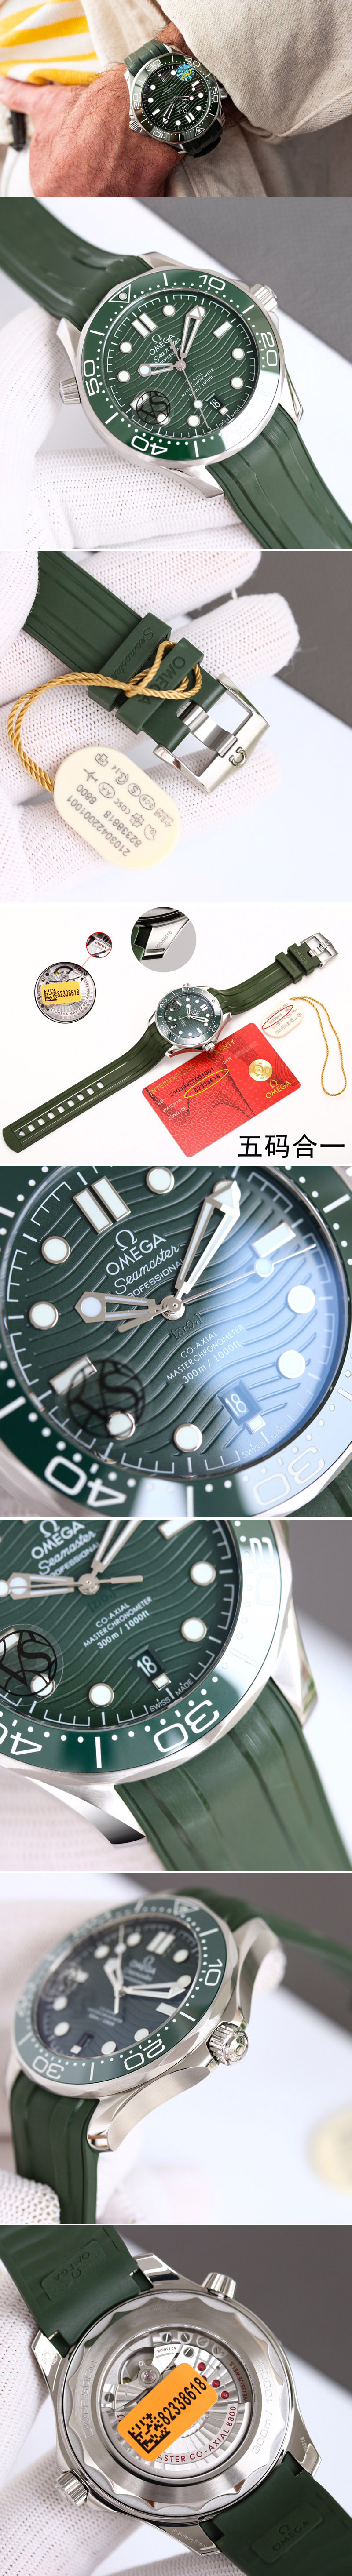 Replica Omega 2018 Seamaster Diver 300M VSF 1:1 Best Edition Green Ceramic Green Dial on Rubber Band A8800 V2 (Black Balance Wheel)